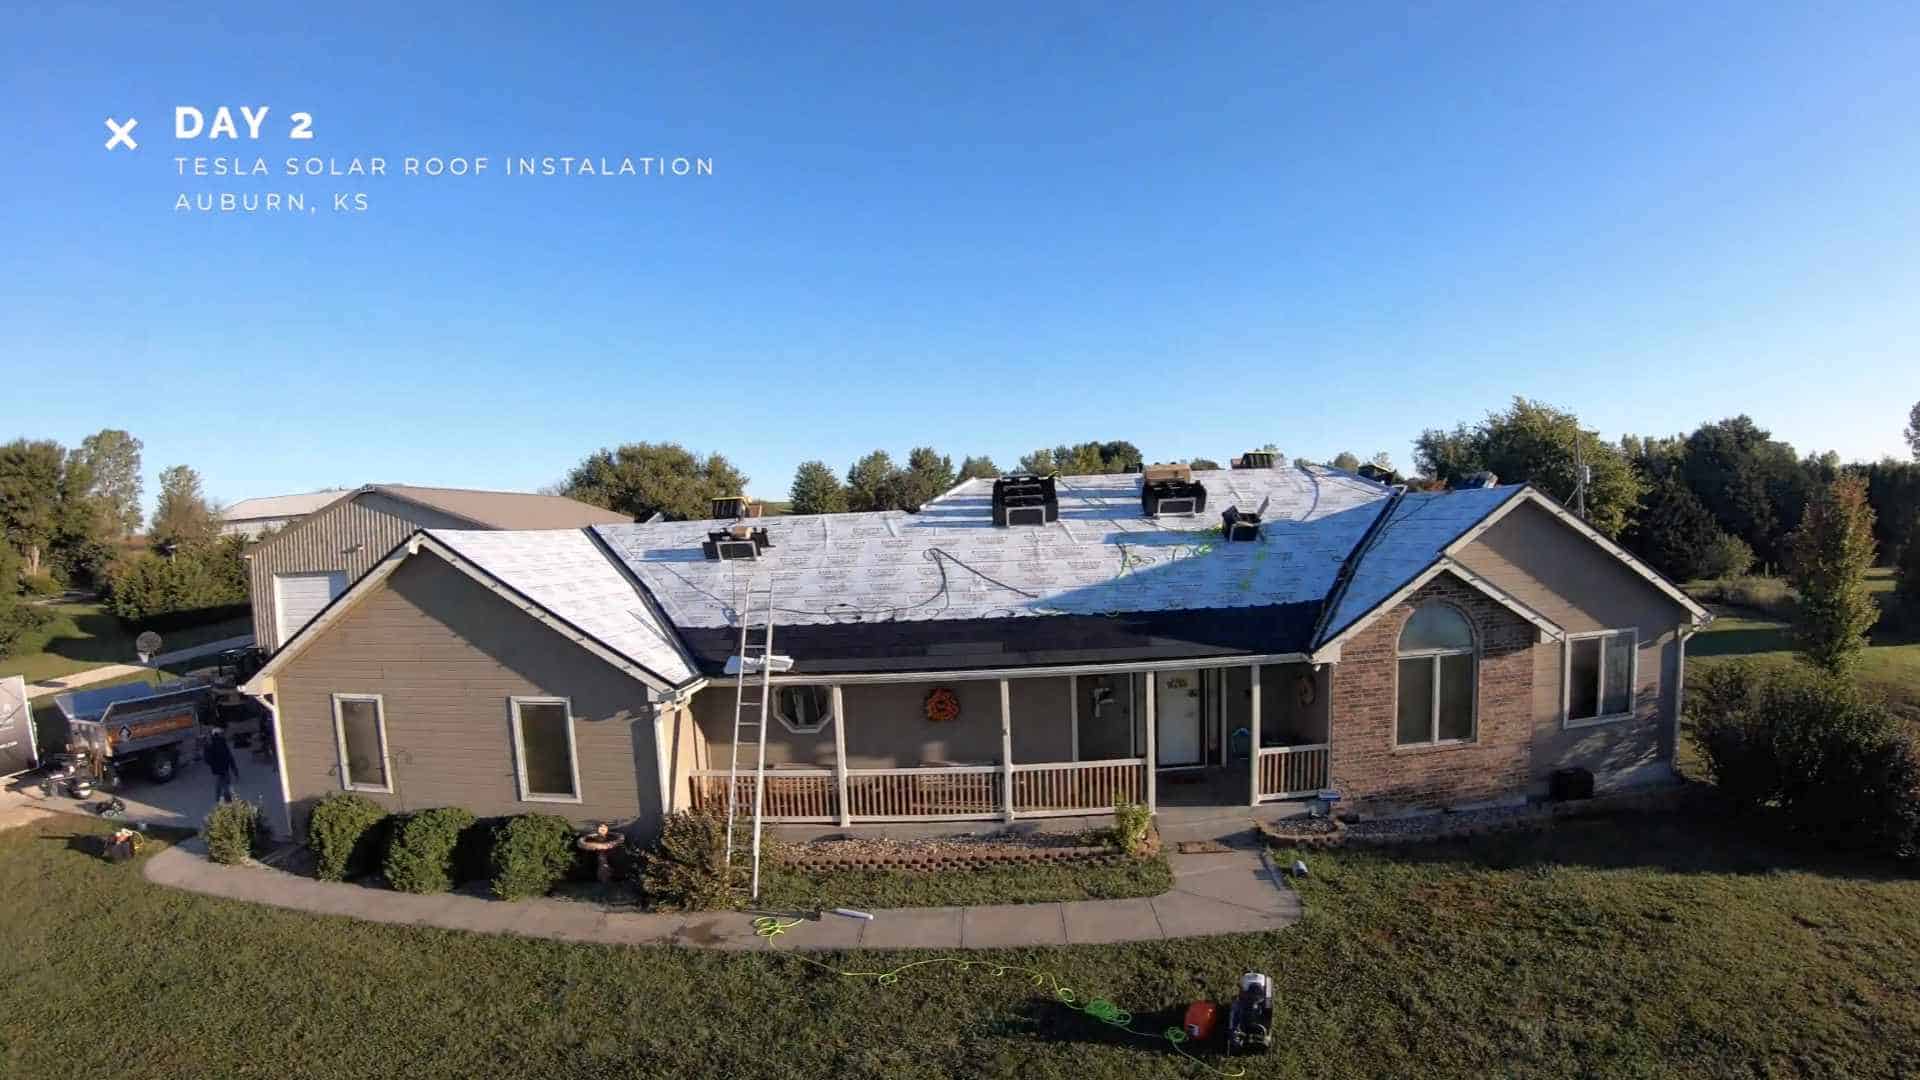 Weddle & Sons Solar Roof Install Day 2